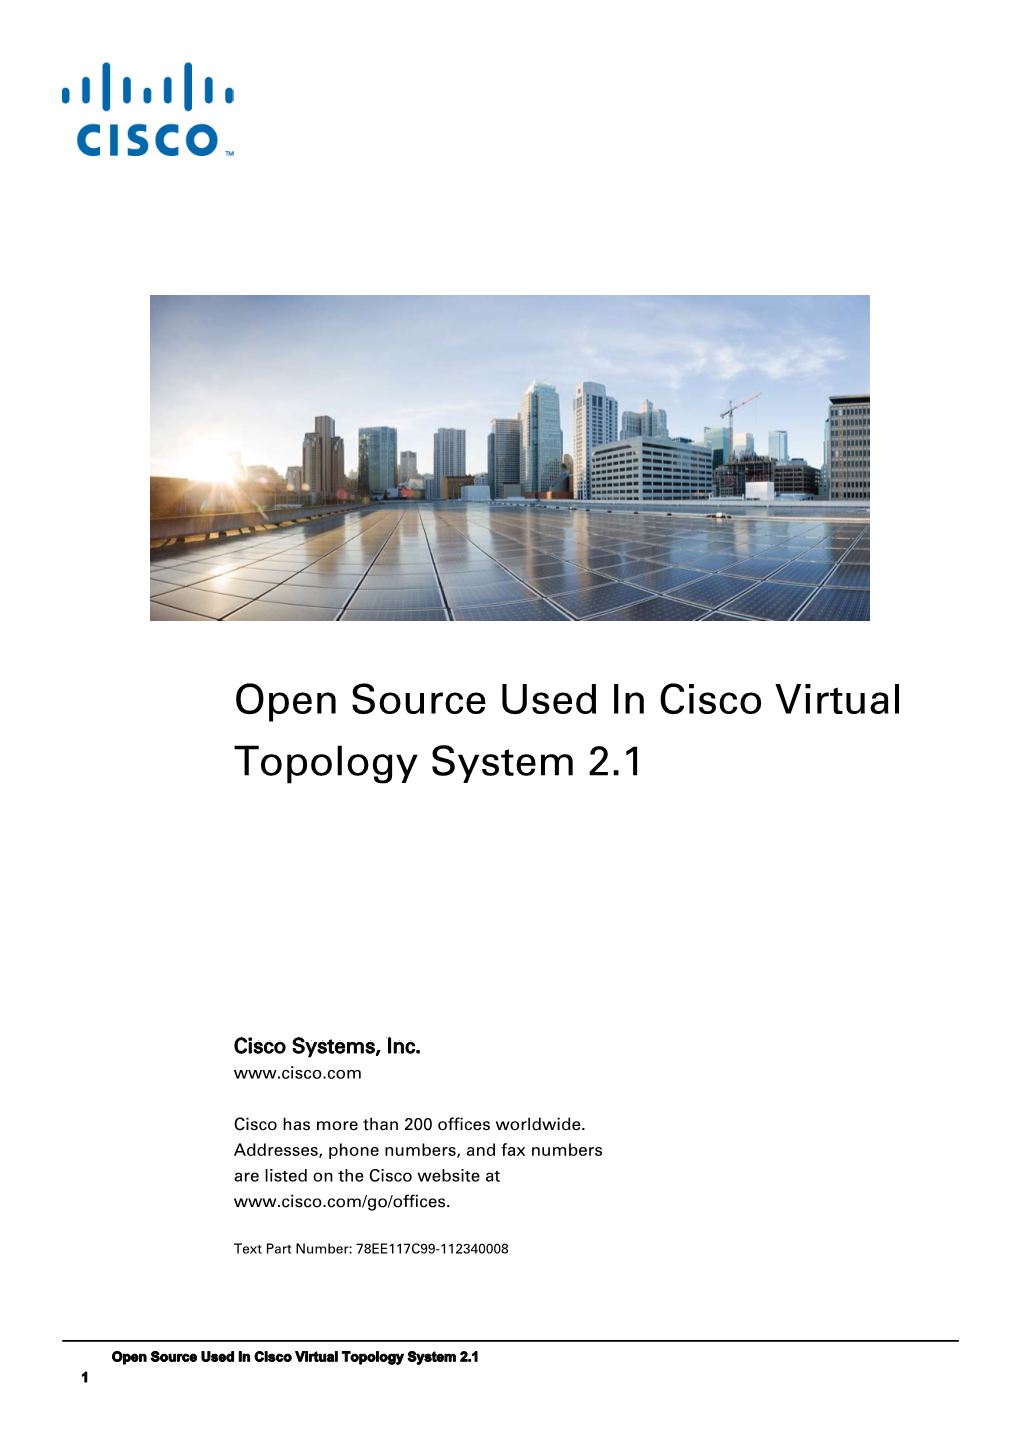 Open Source Used in Cisco Virtual Topology System 2.1